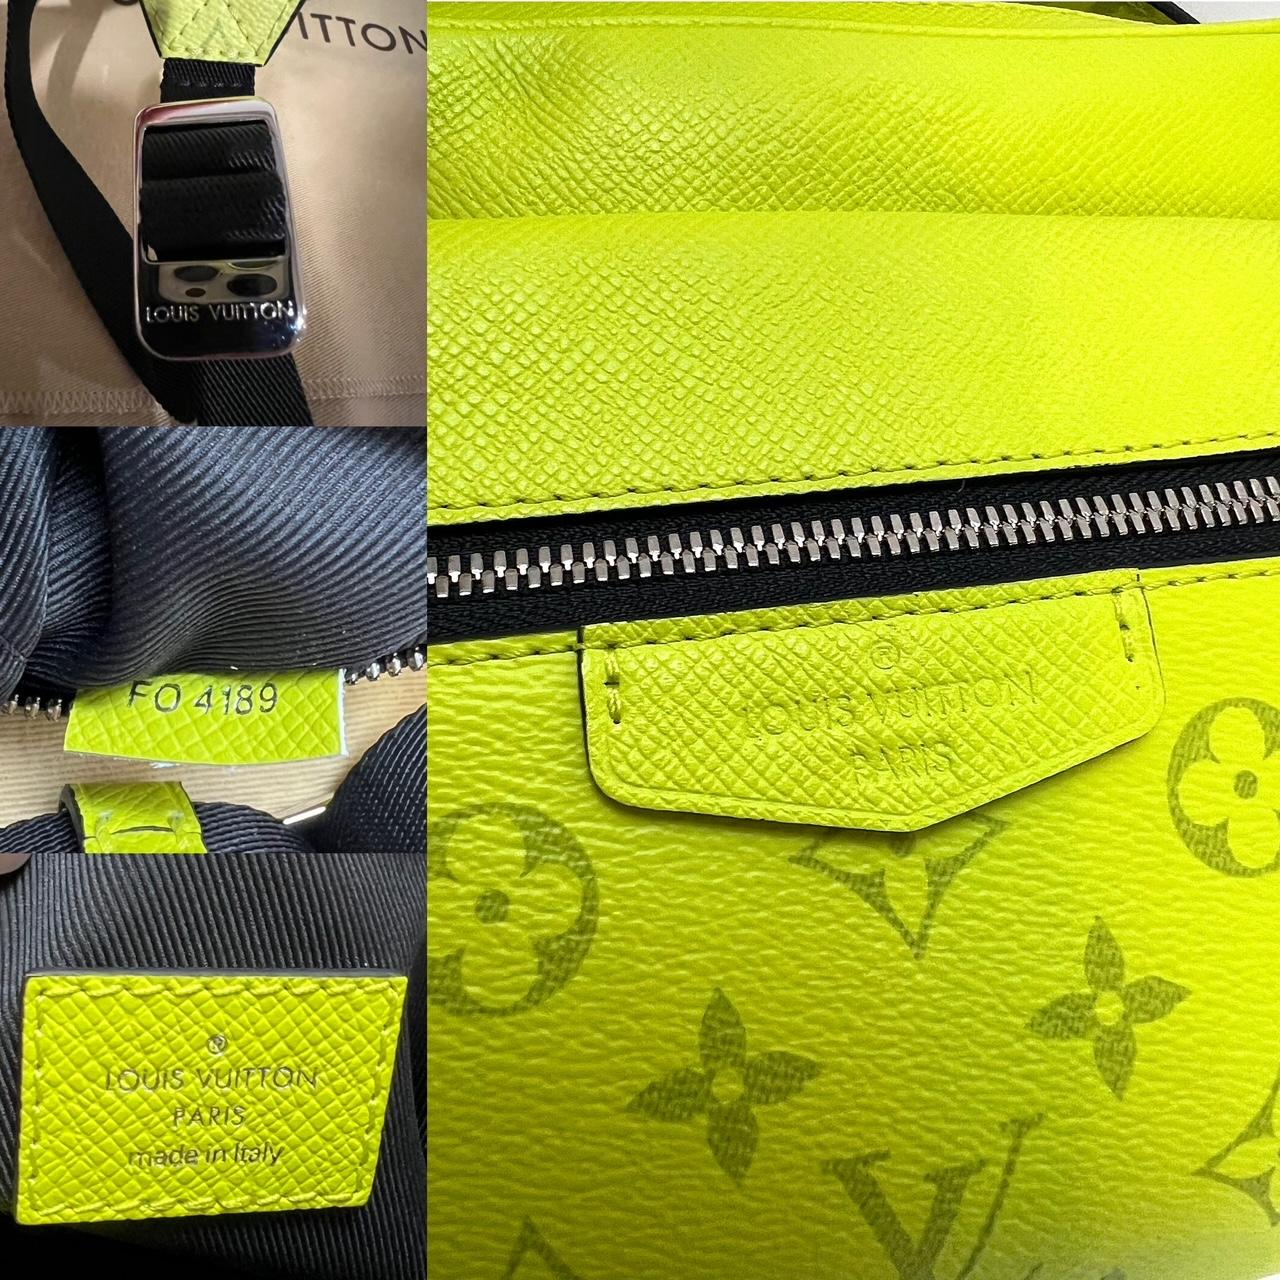 Pre-Owned  100% Authentic
LOUIS VUITTON Taigarama Outdoor Messenger Yellow Bag
RATING: A...excellent, near mint, has little to 
no signs of wear
MATERIAL: monogram coated canvas, Taiga cowhide leather
STRAP: leather and canvas Not removable,